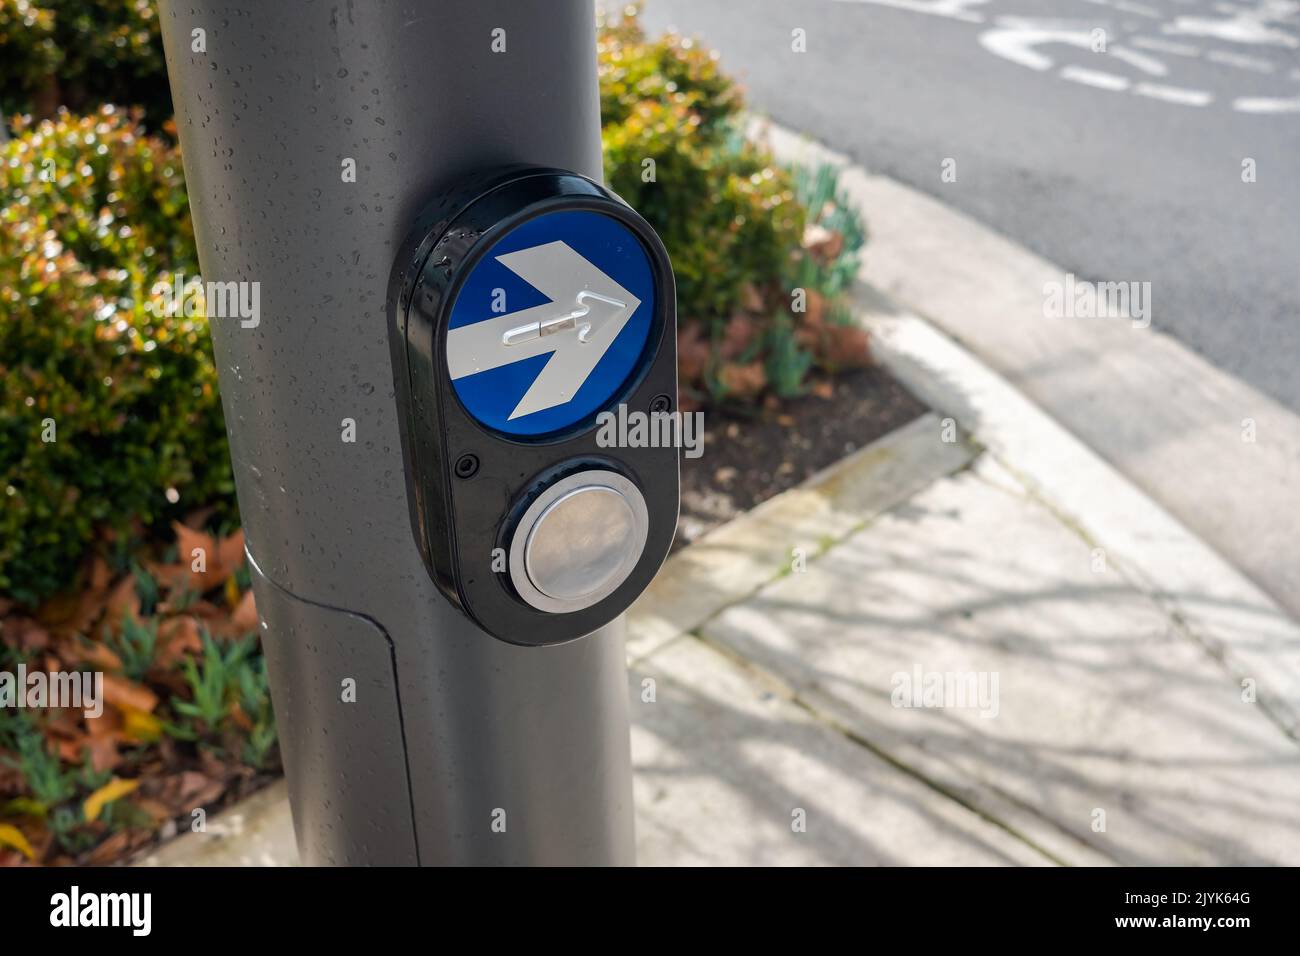 Pedestrian crossing control activation button on a traffic light pole in South Australia on a day Stock Photo